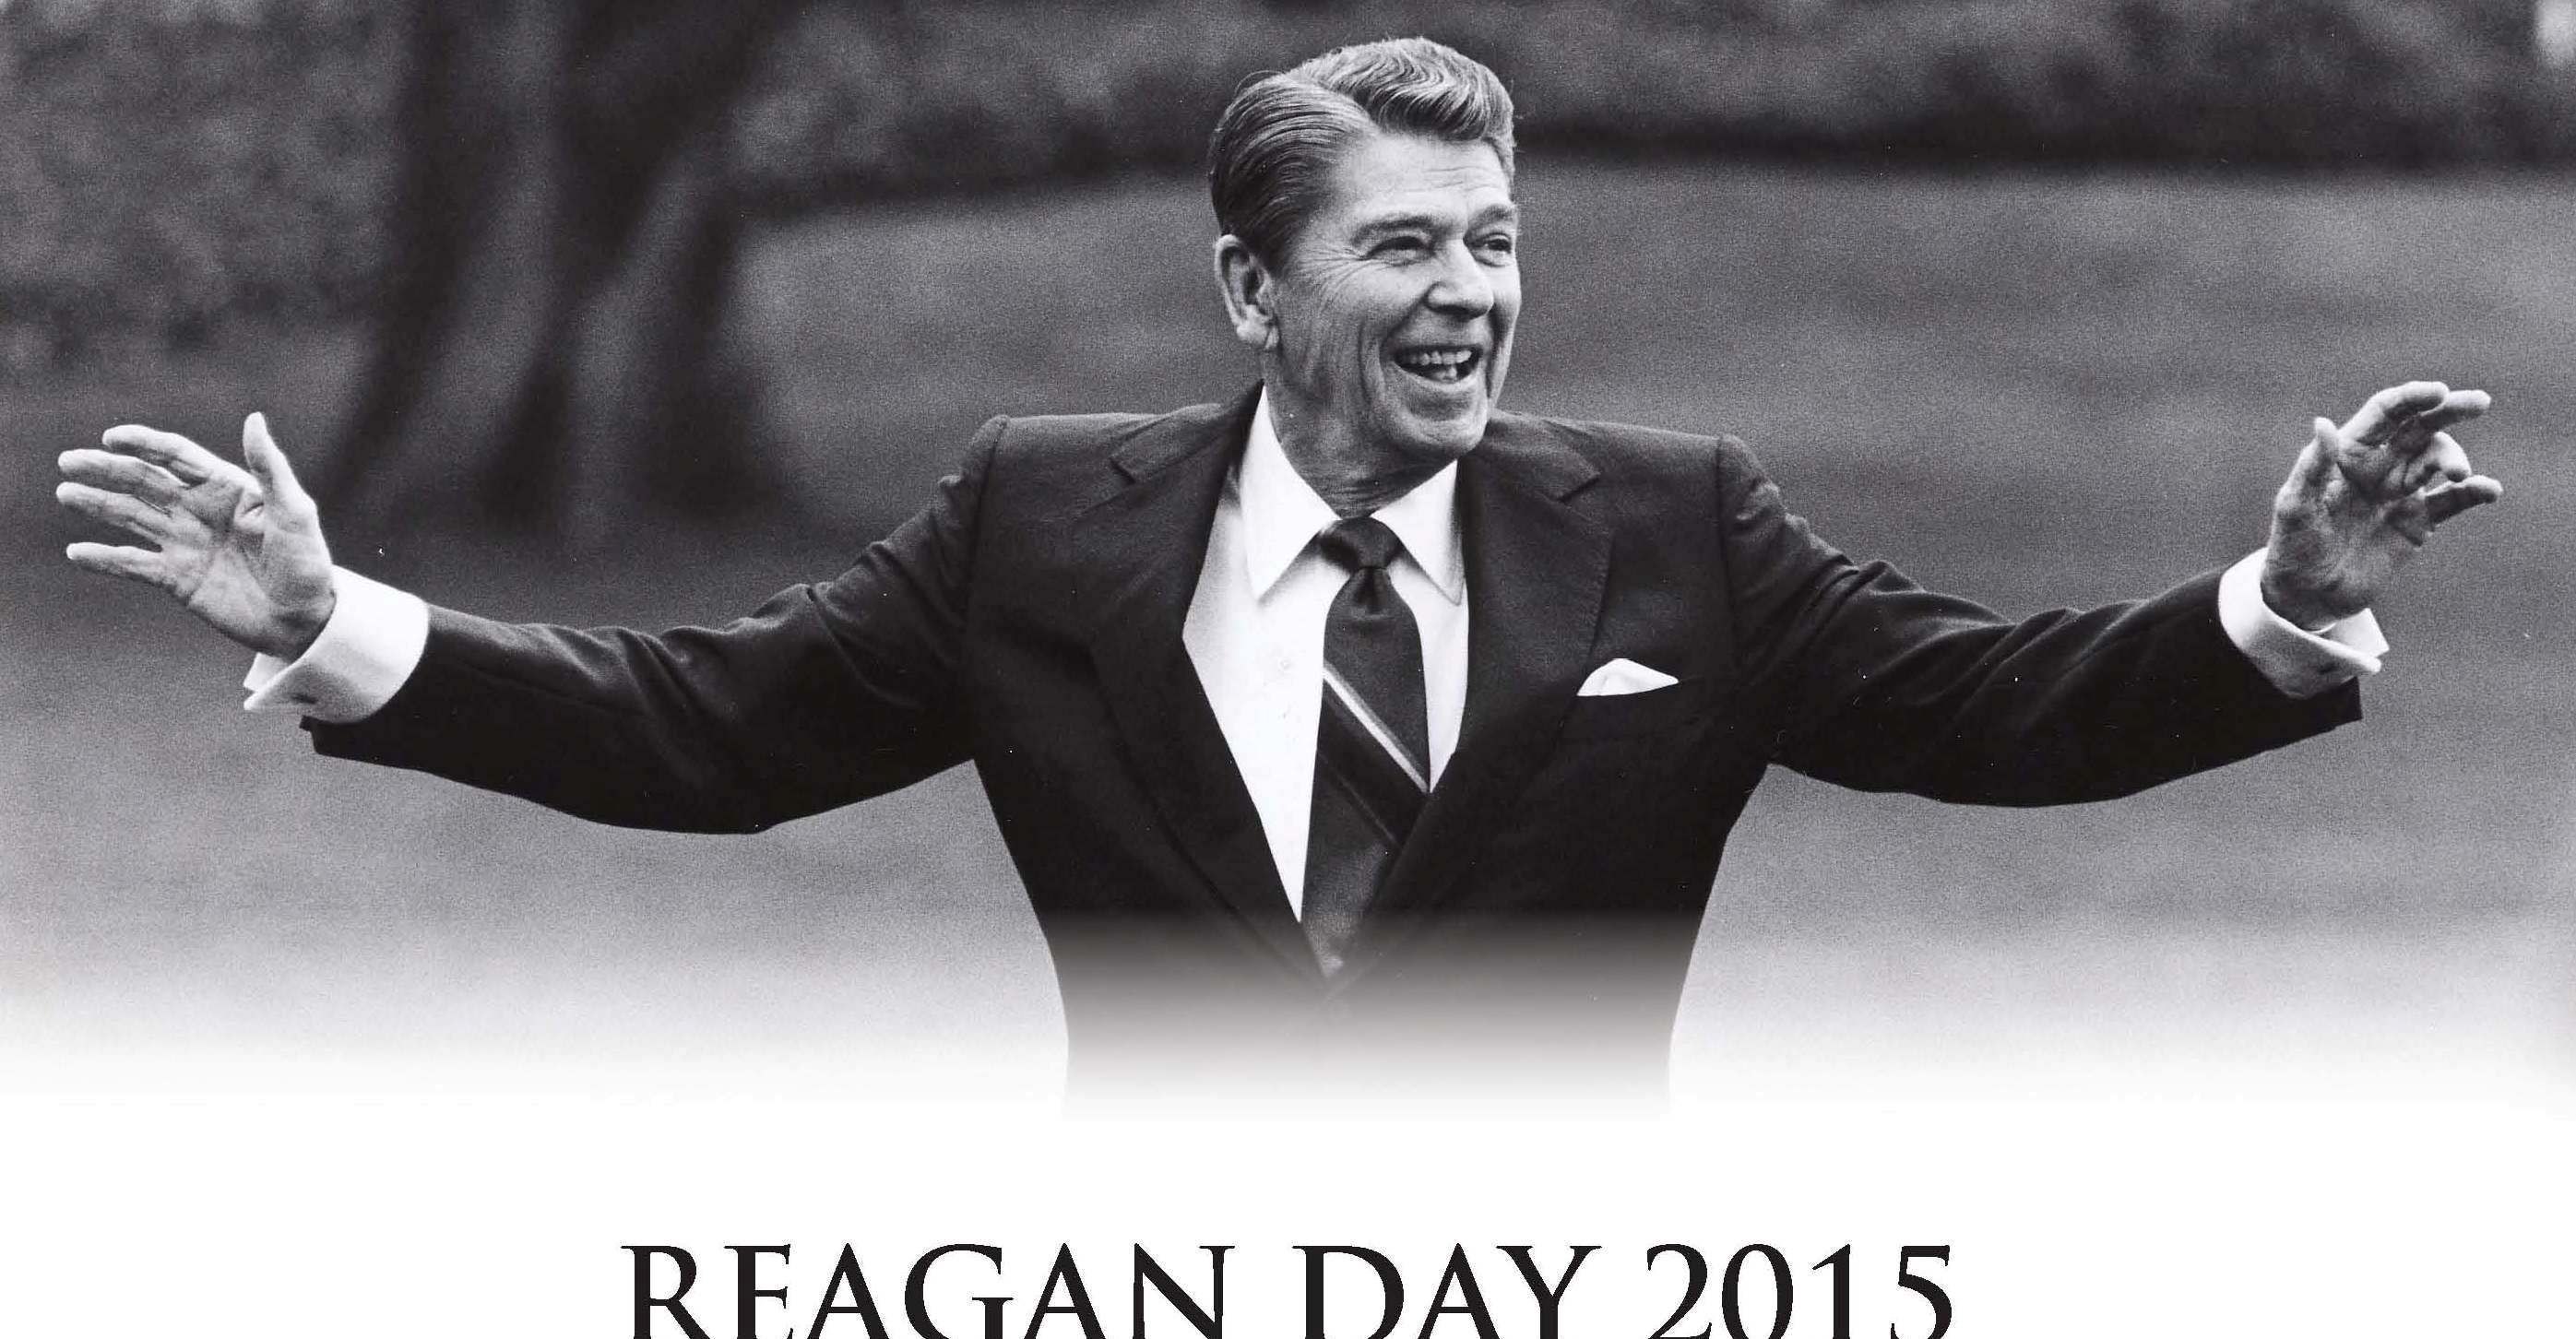 Tickets available for Reagan Day 2015, sponsored by Rockwall County GOP